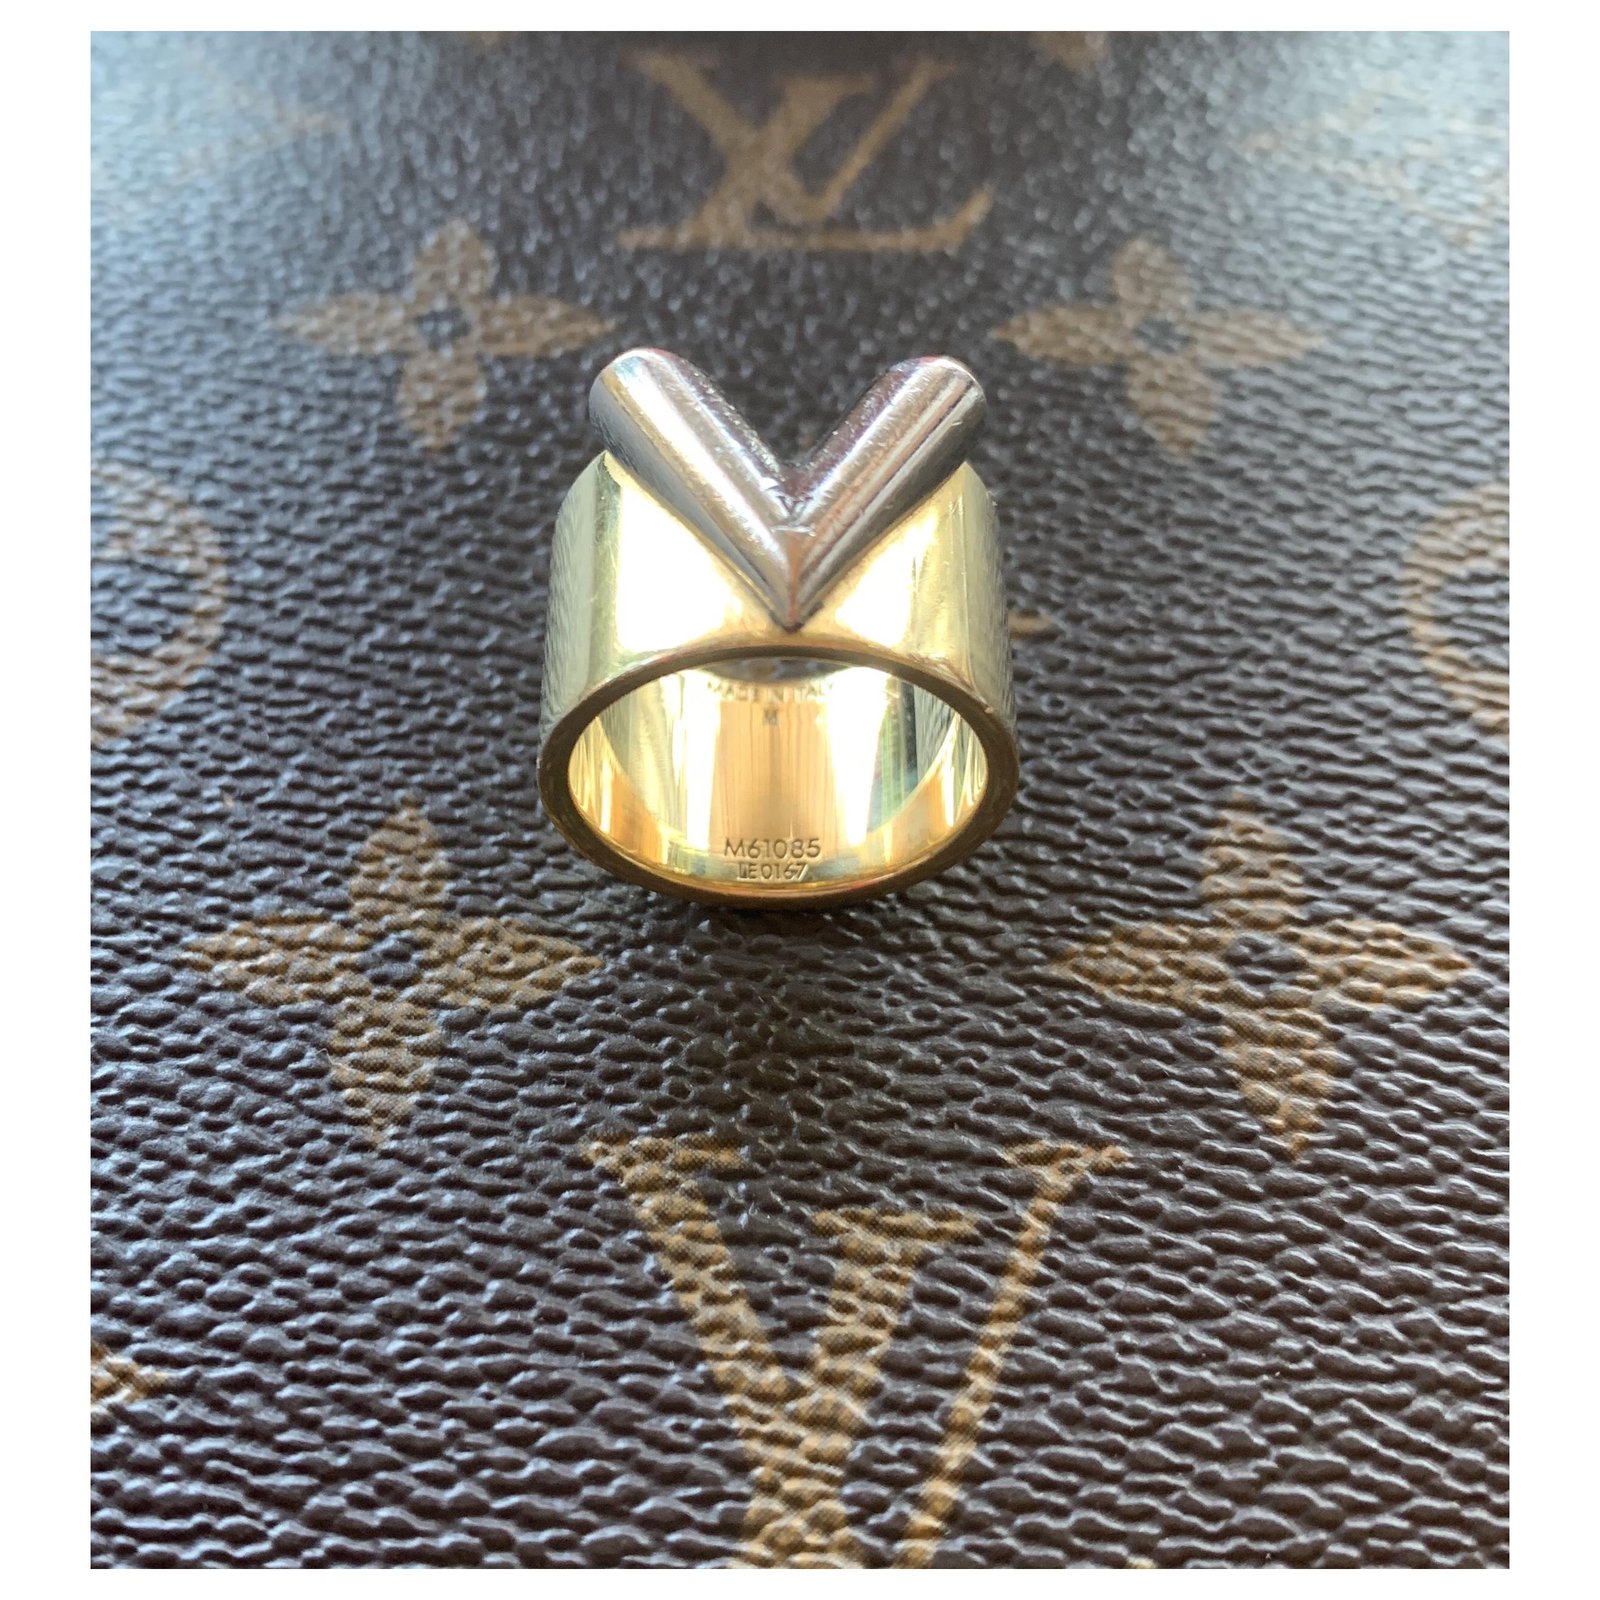 Louis Vuitton - M61085 Essential V - Taille M - Ring - Catawiki